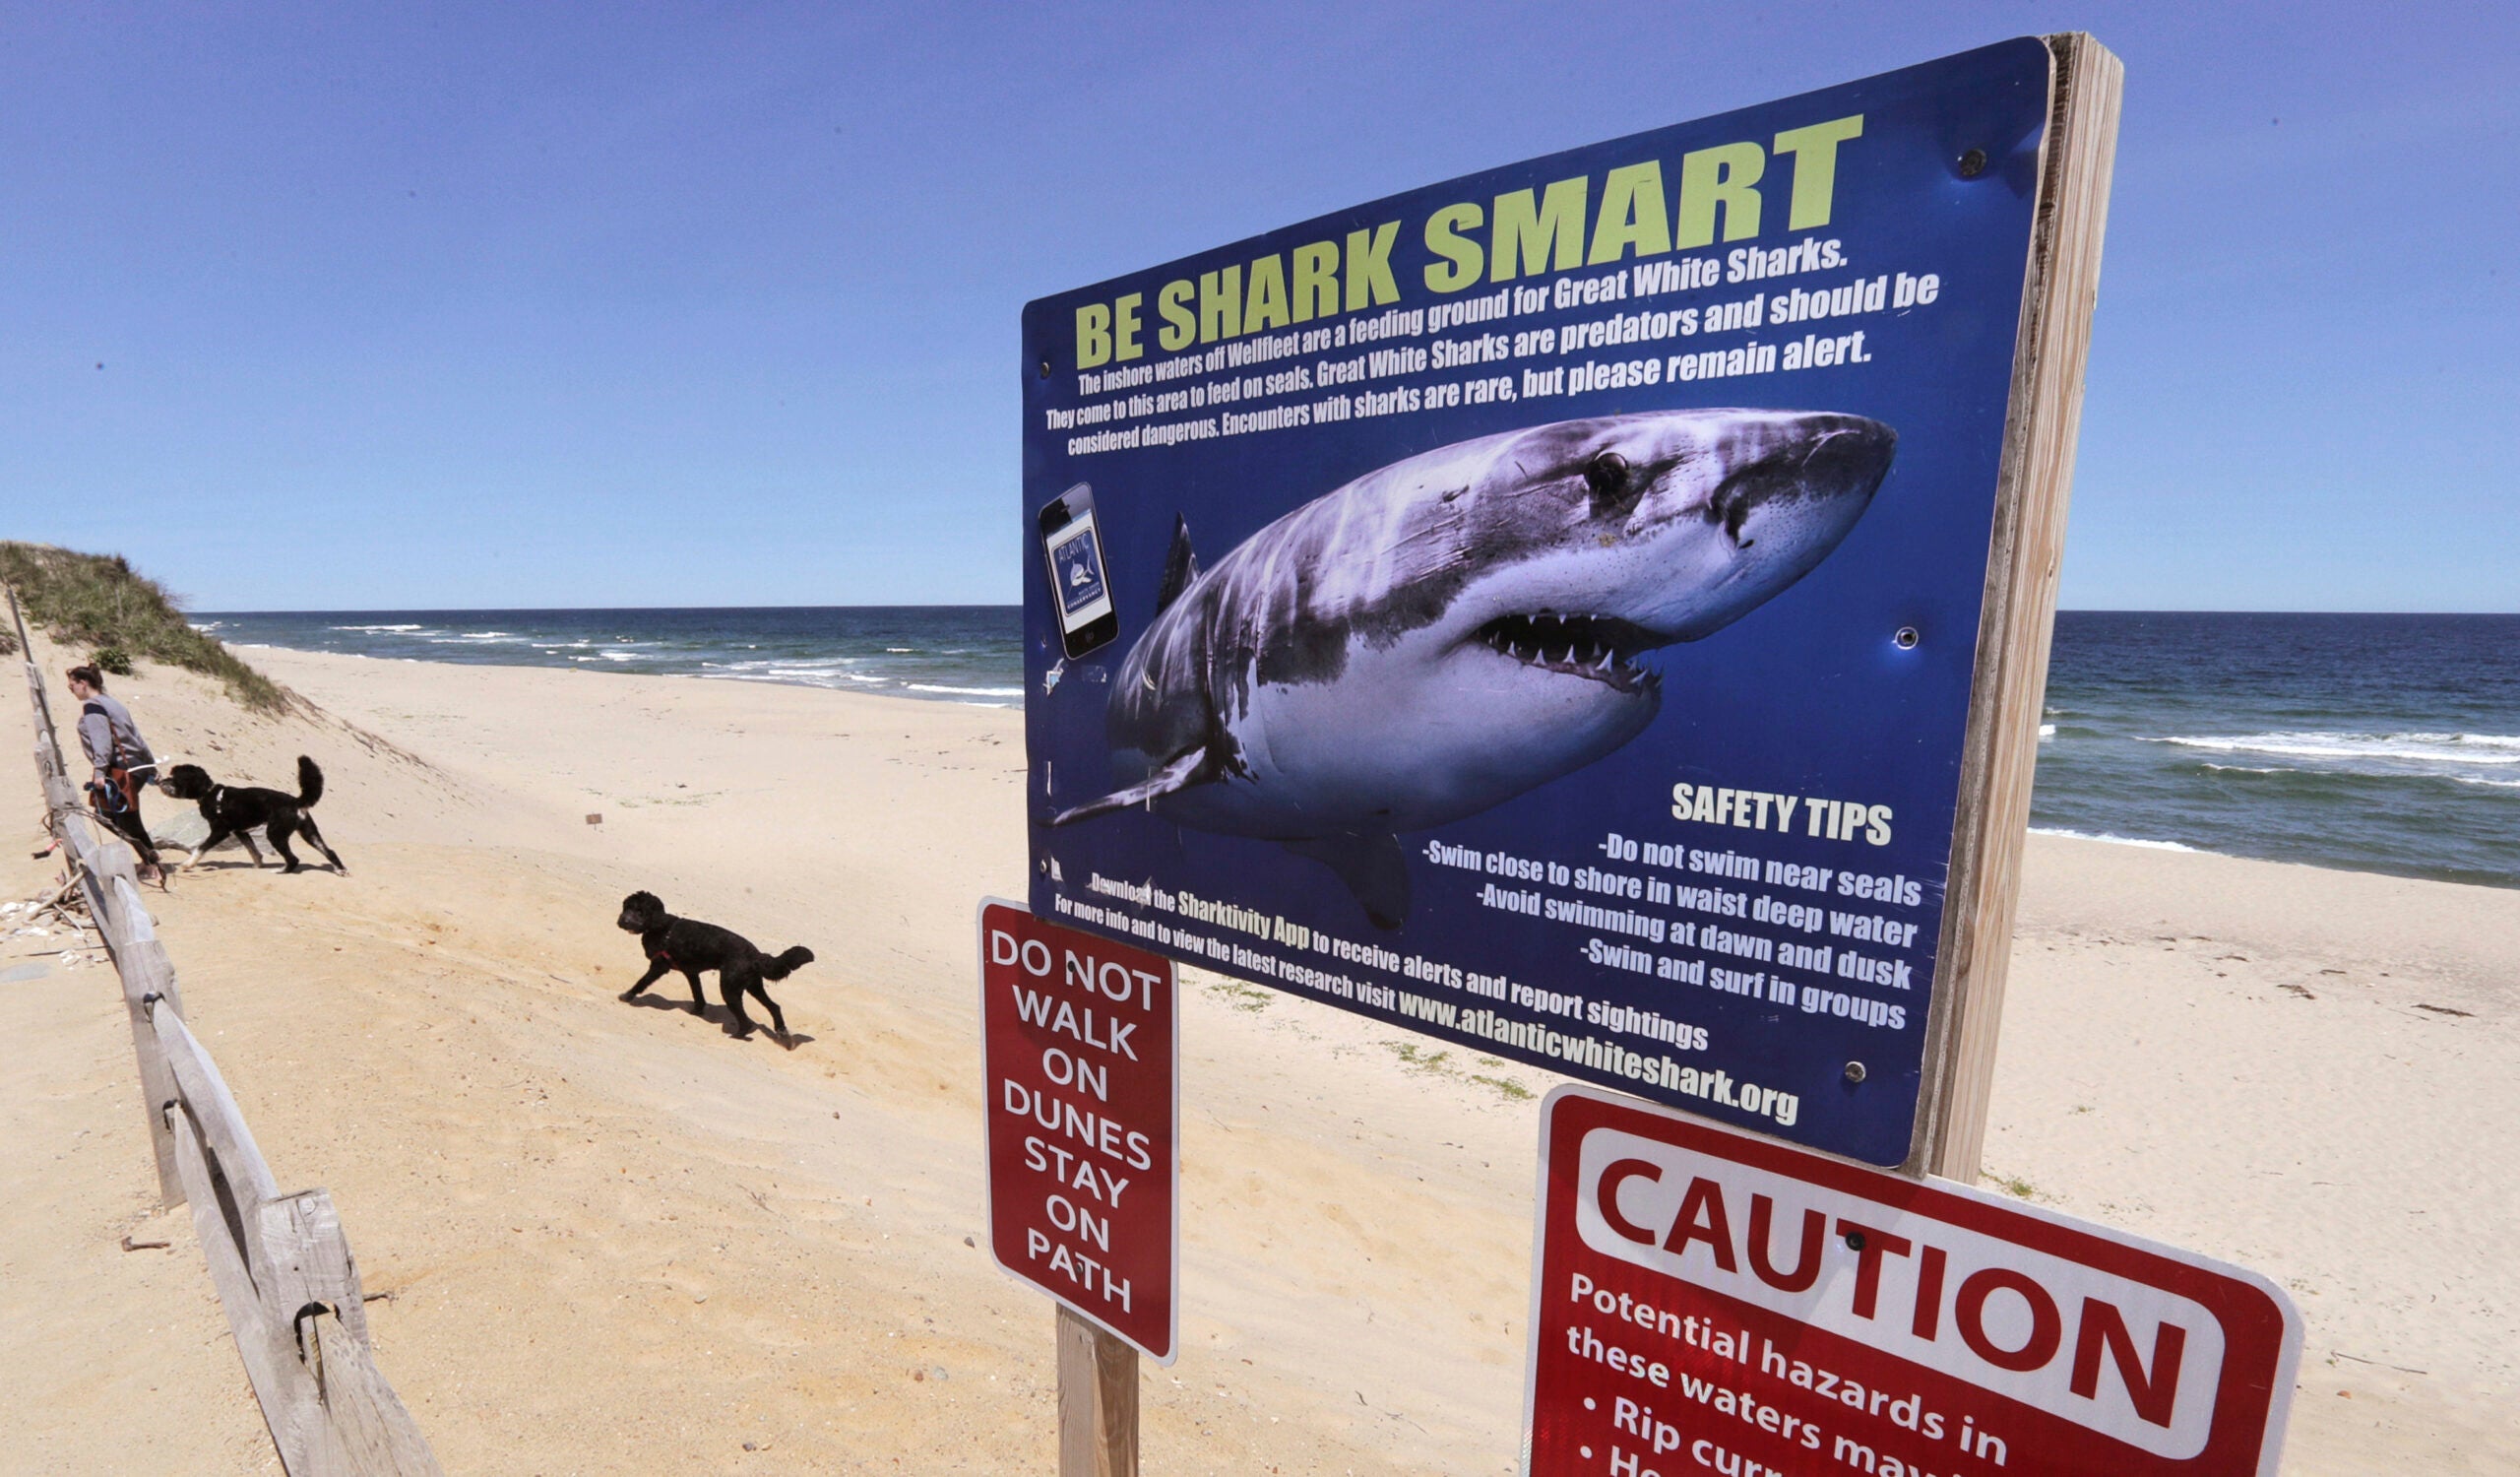 '60 Minutes' went to Cape Cod to learn more about great white sharks. Here's the report.